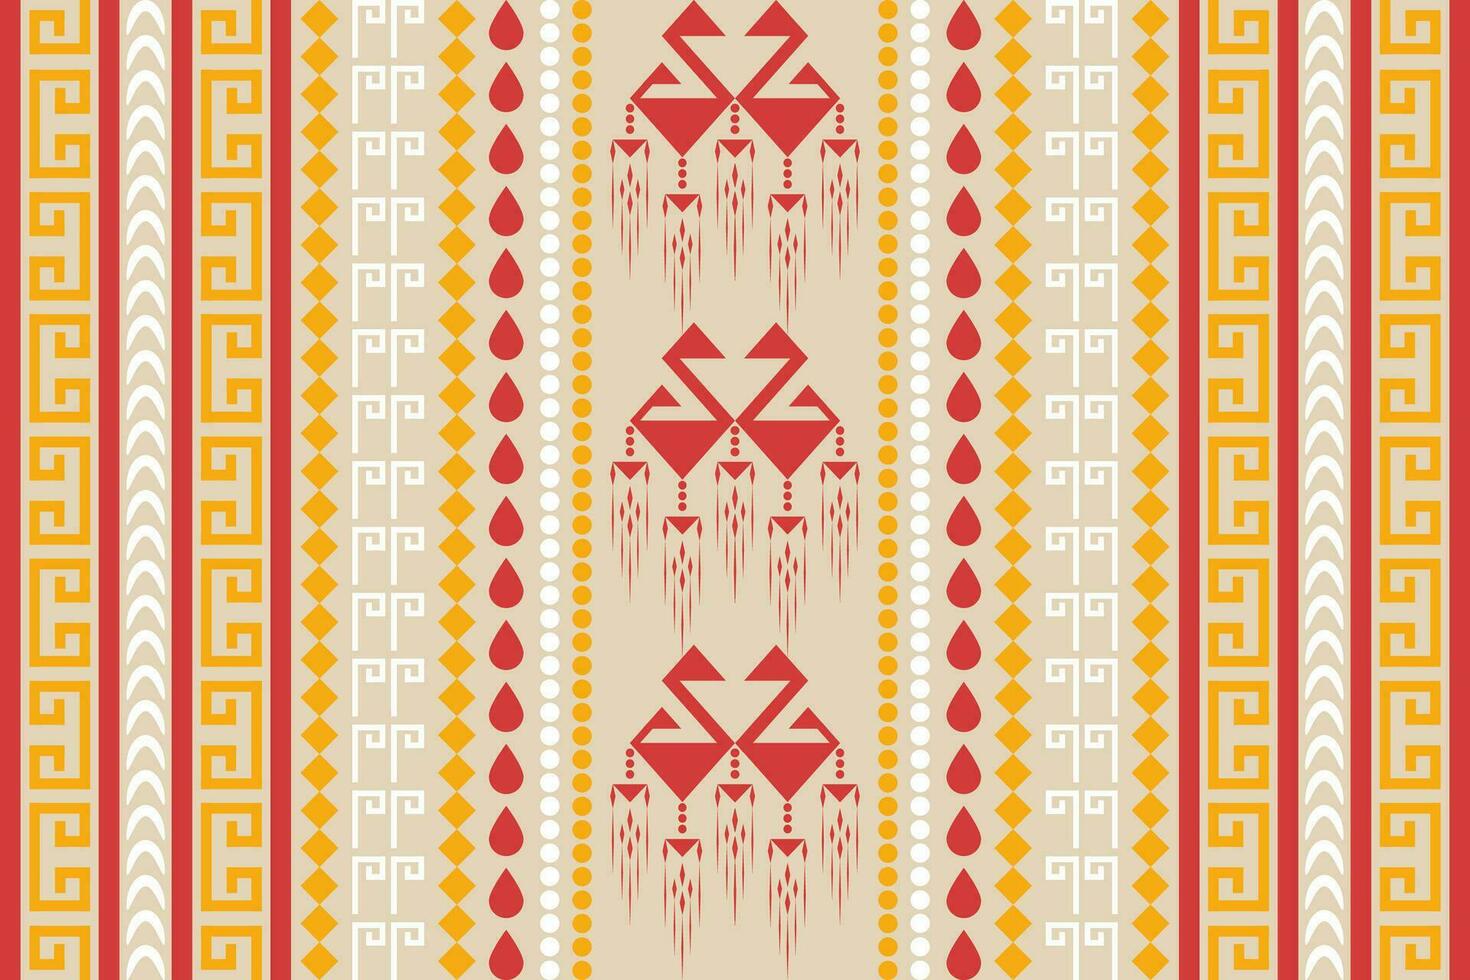 Geometric ethnic pattern traditional Design for background, carpet, wallpaper, clothing, wrapping, Batik, fabric, Vector illustration tribal style.